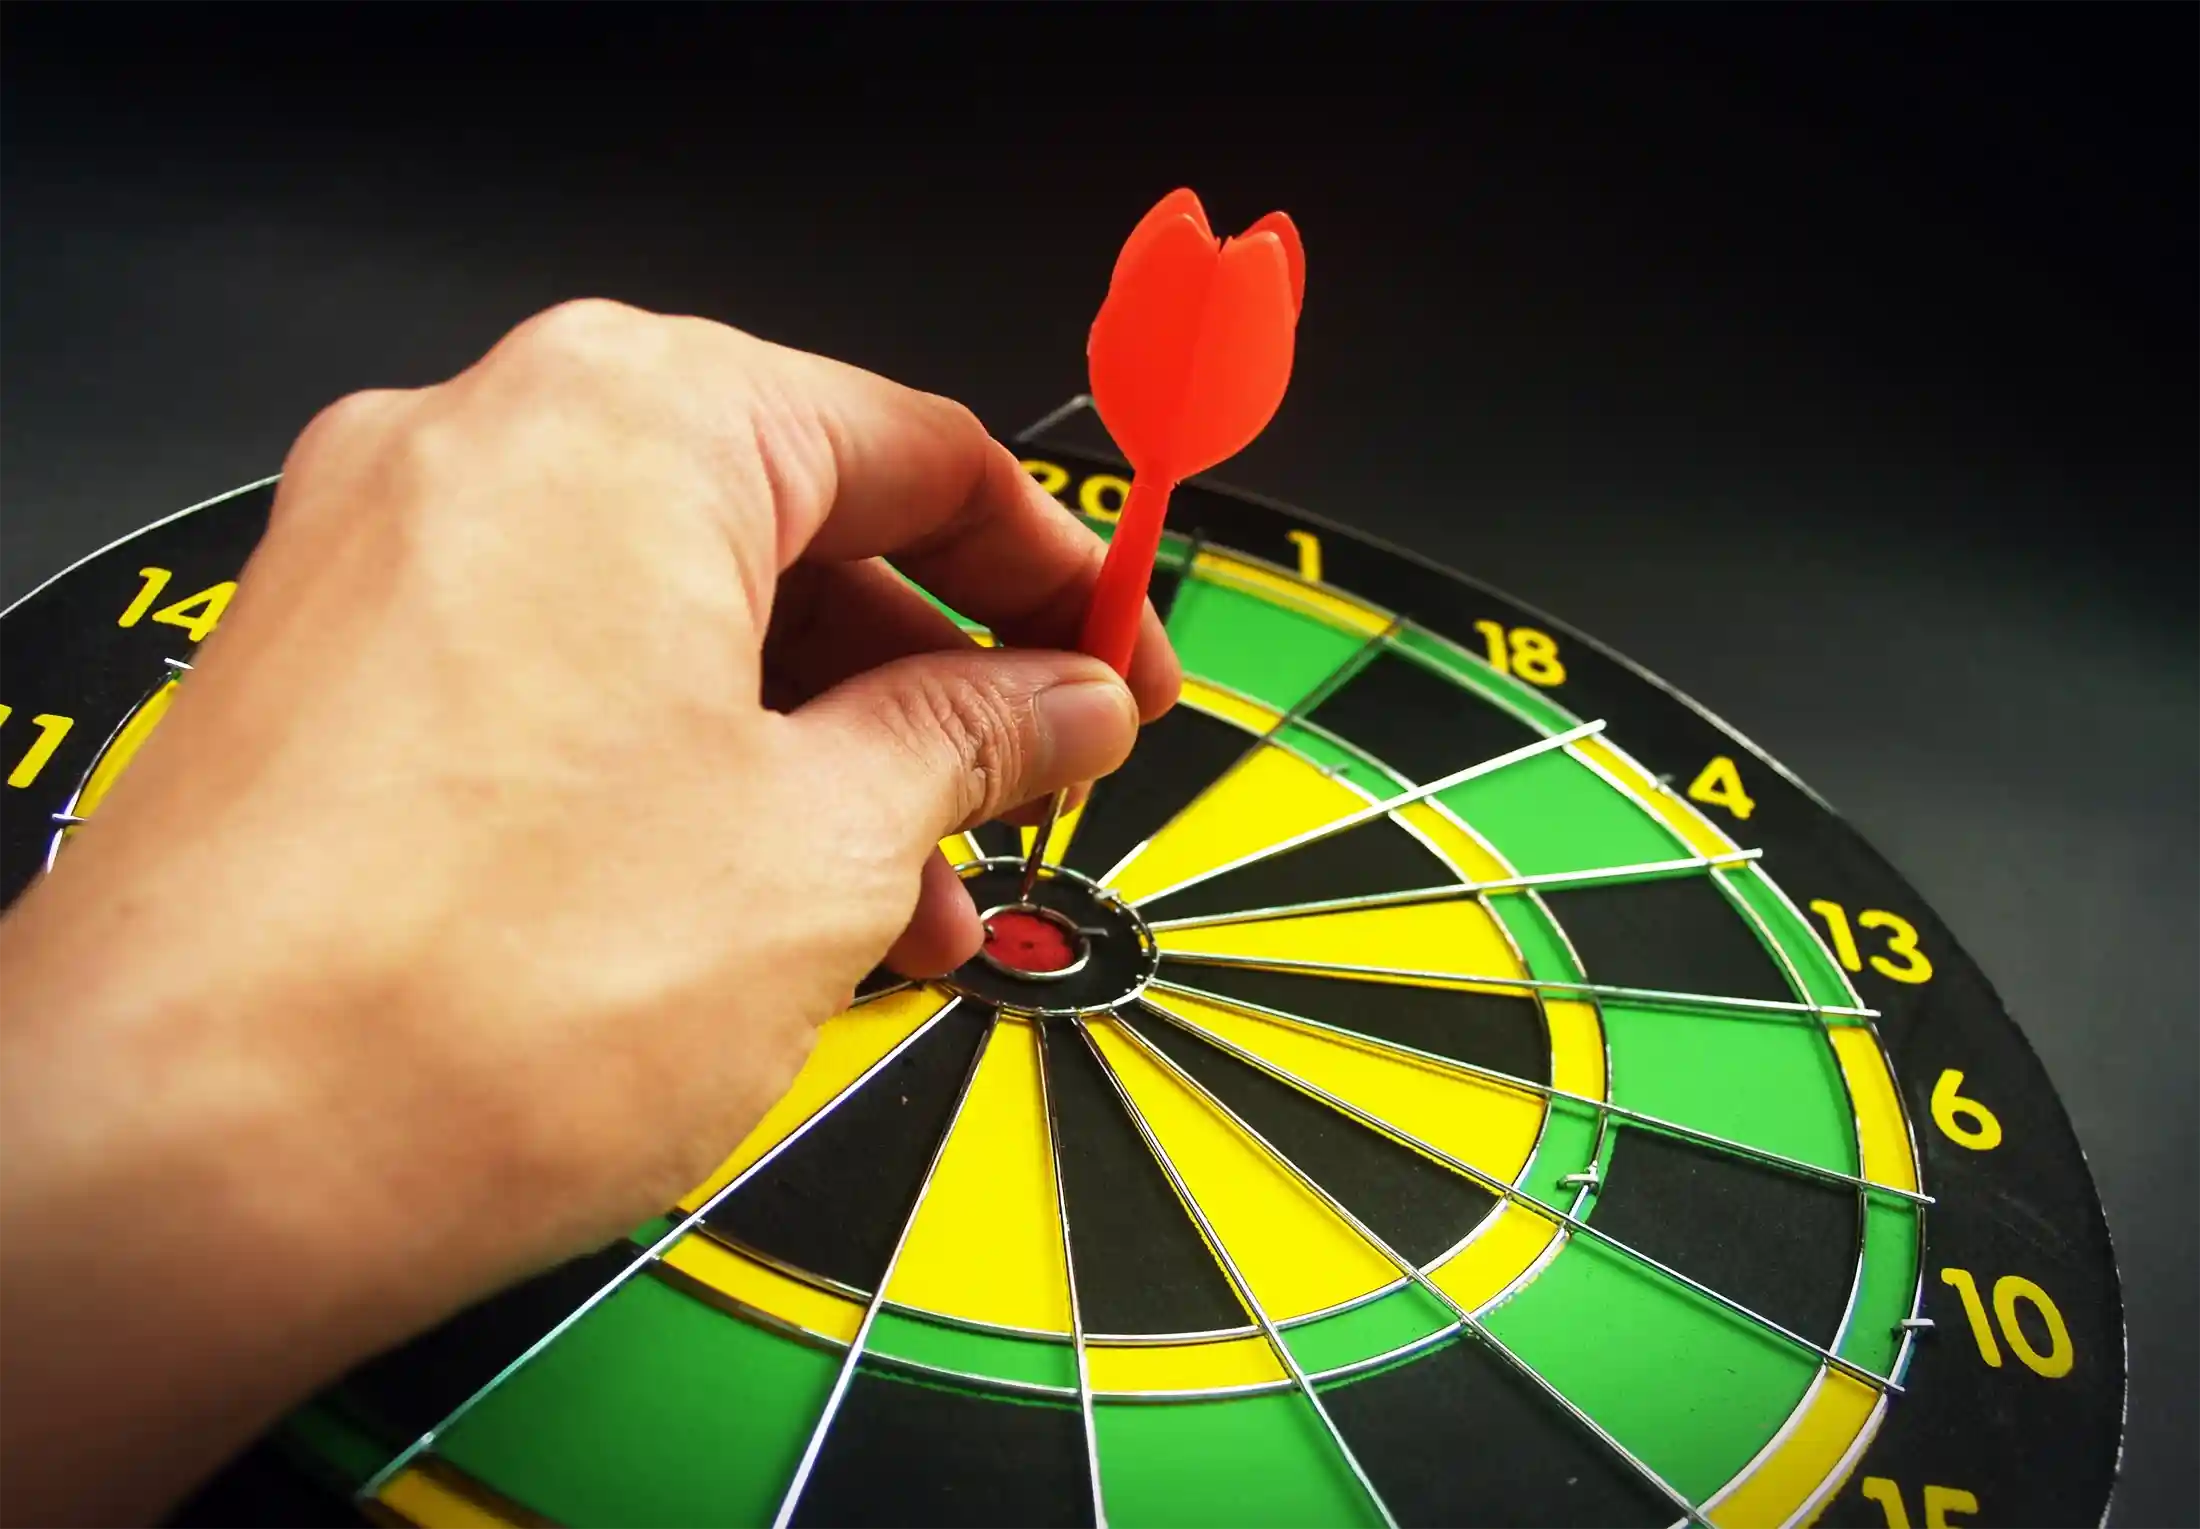 Person pulling a dart out of a bullseye on dart board